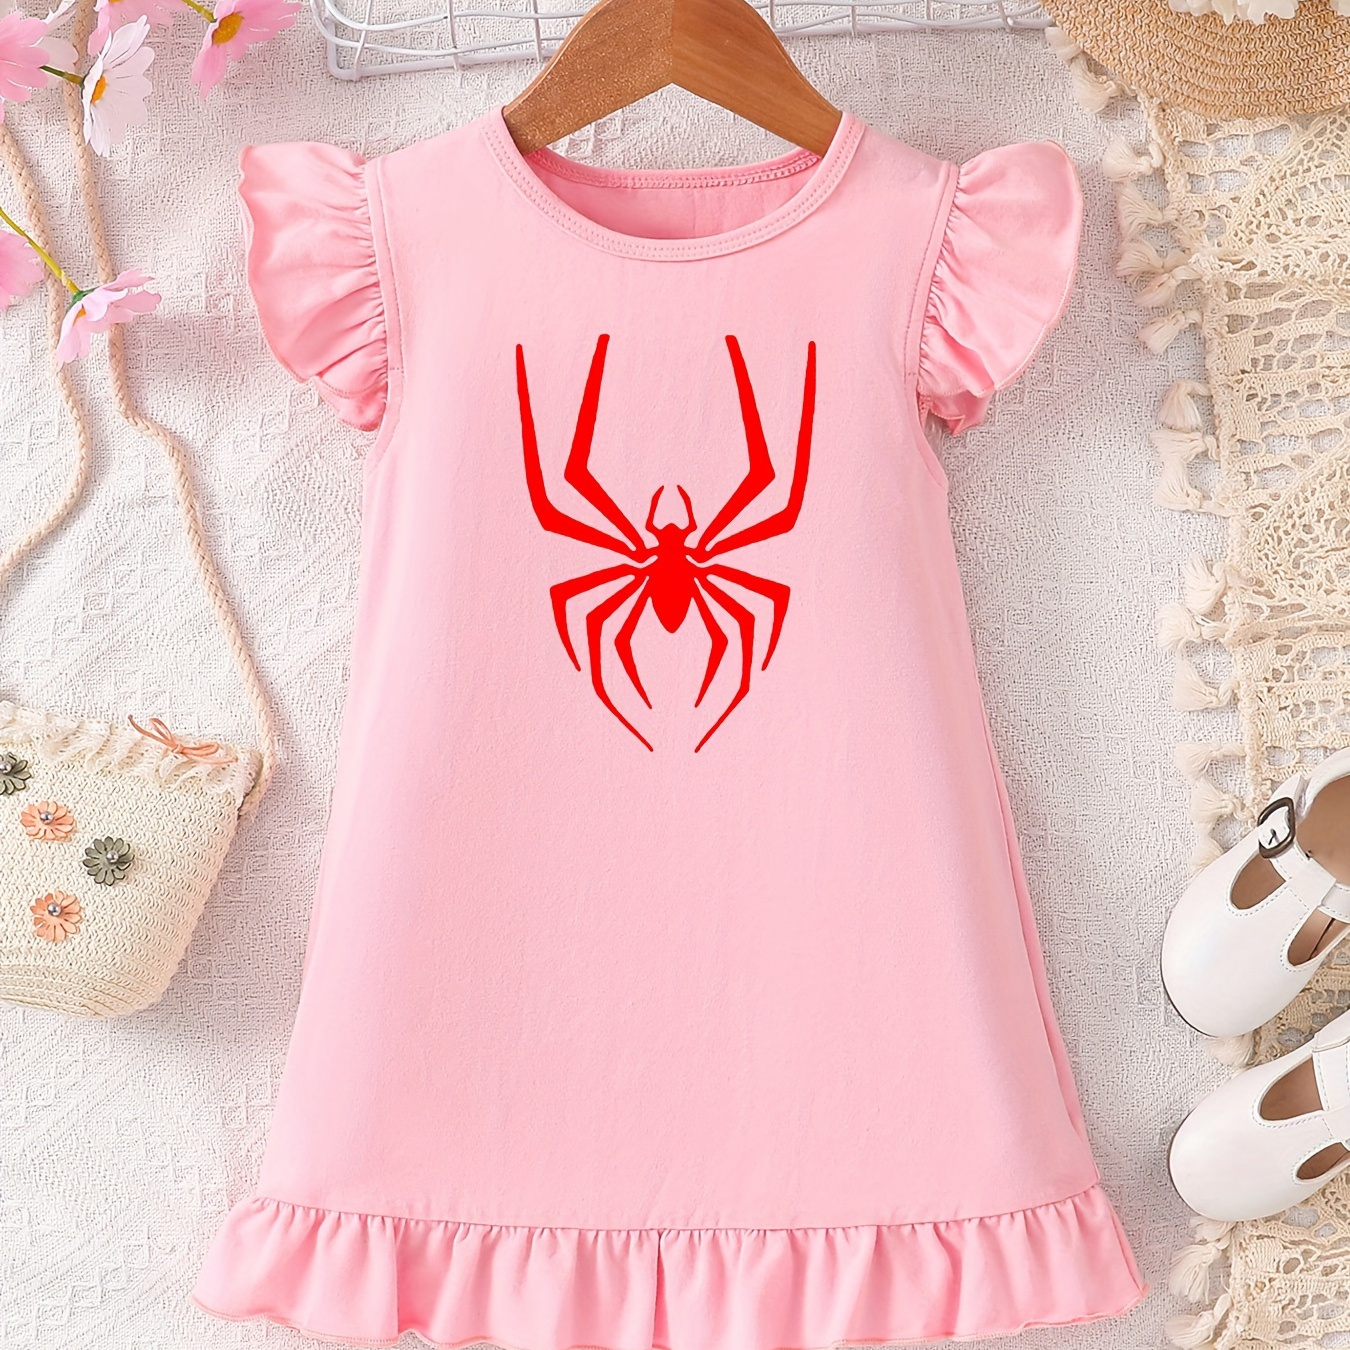 

Red Spider Graphic Print, Baby Girls' Stylish Crew Neck Ruffle Trim Cotton Dress For Spring & Summer, Toddler Girls' Clothes